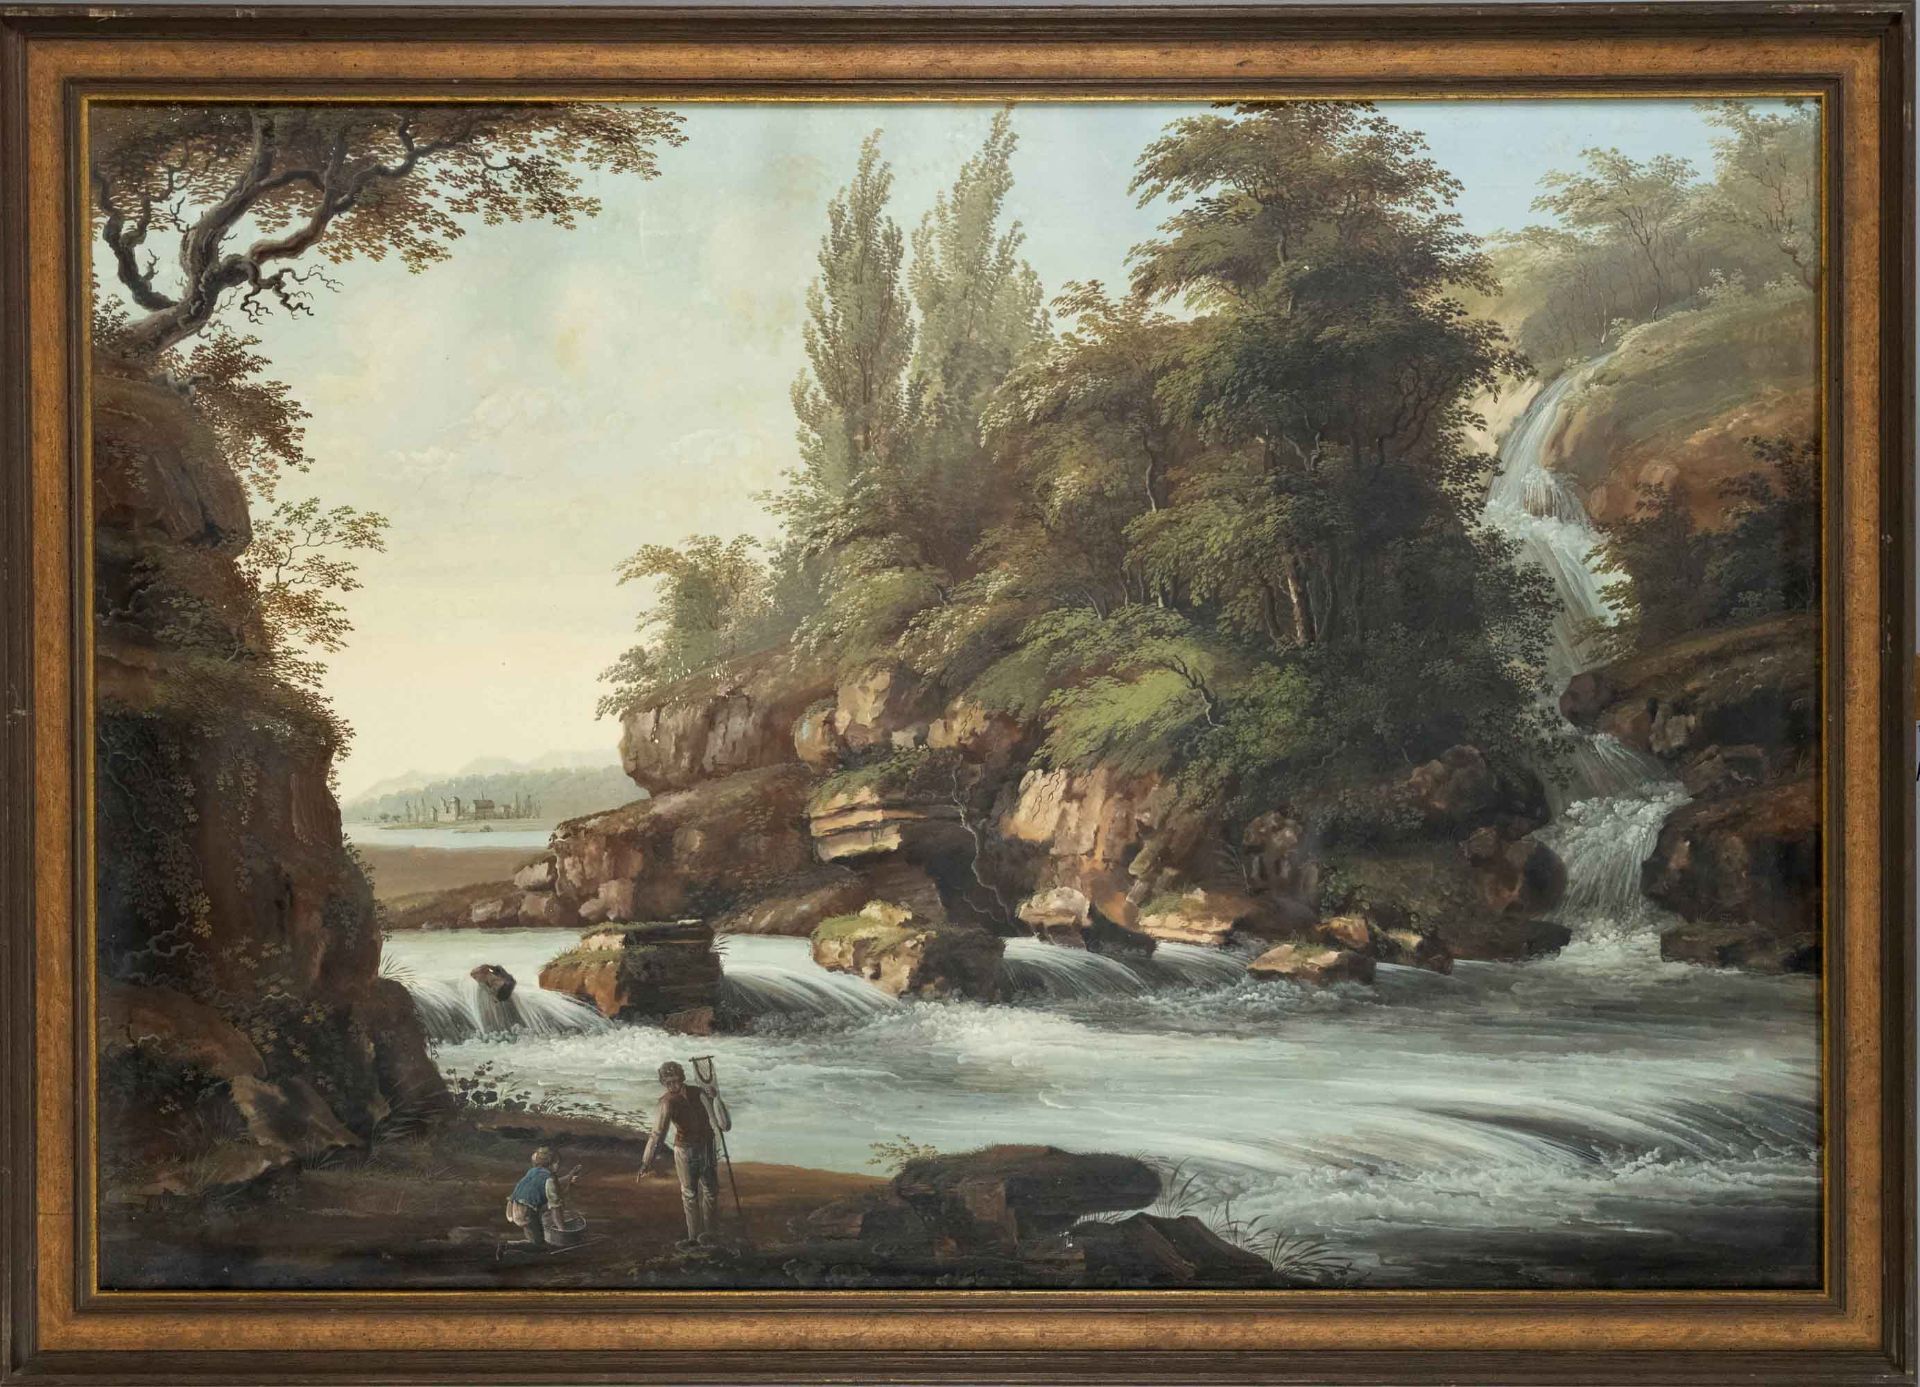 Swiss painter of the 18th century, pair of romantic landscapes at a rapids with fishermen.